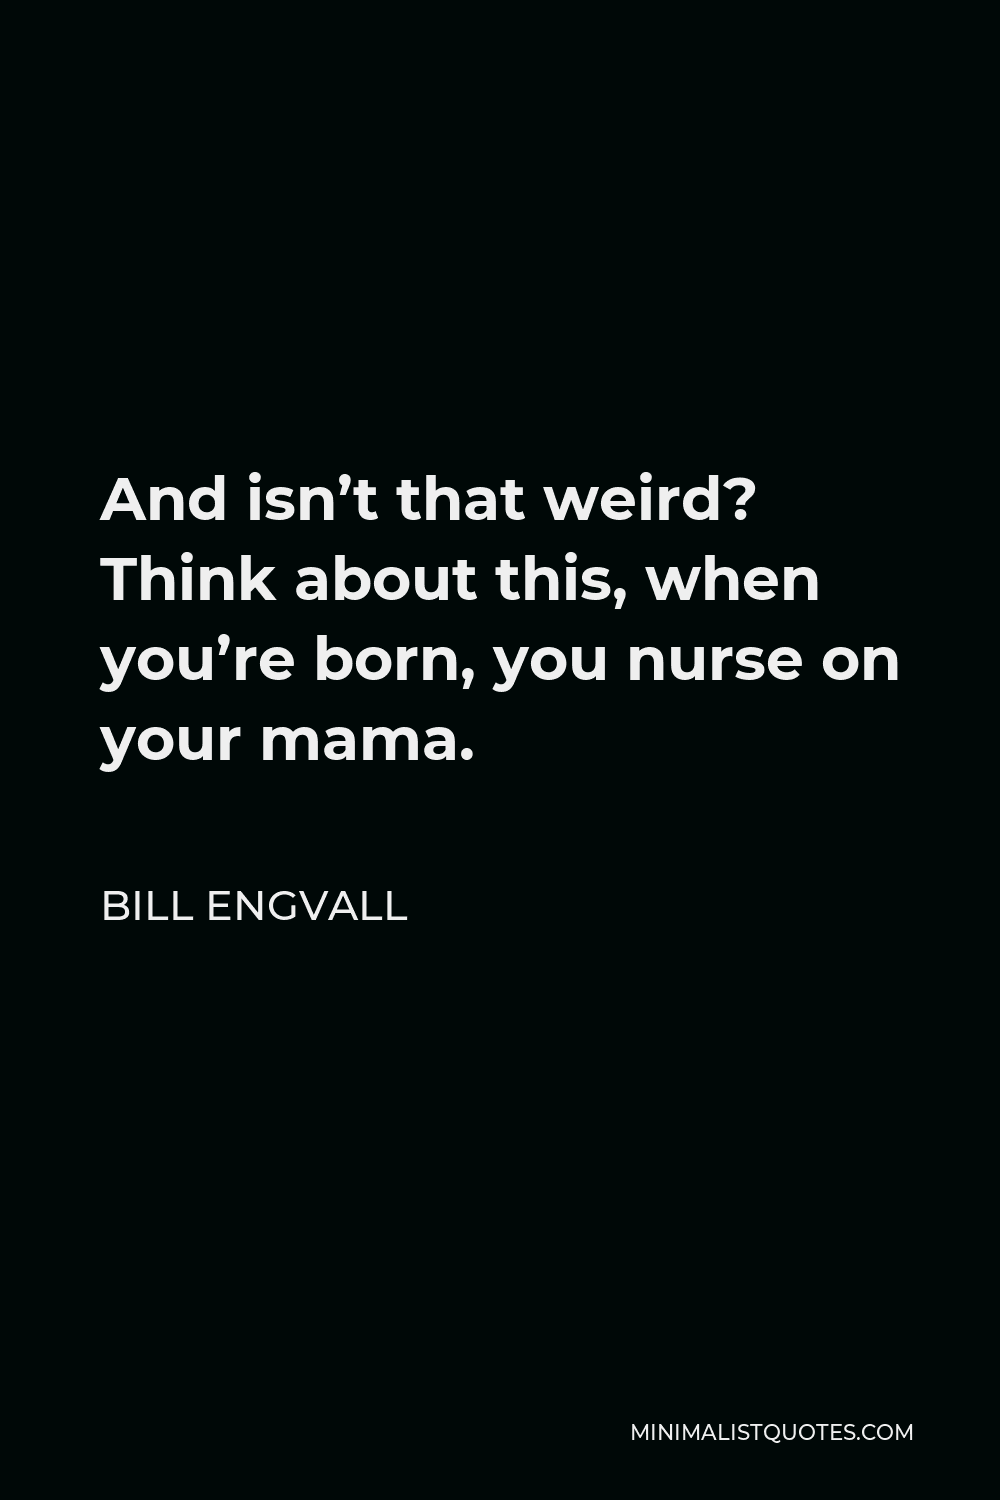 Bill Engvall Quote - And isn’t that weird? Think about this, when you’re born, you nurse on your mama.